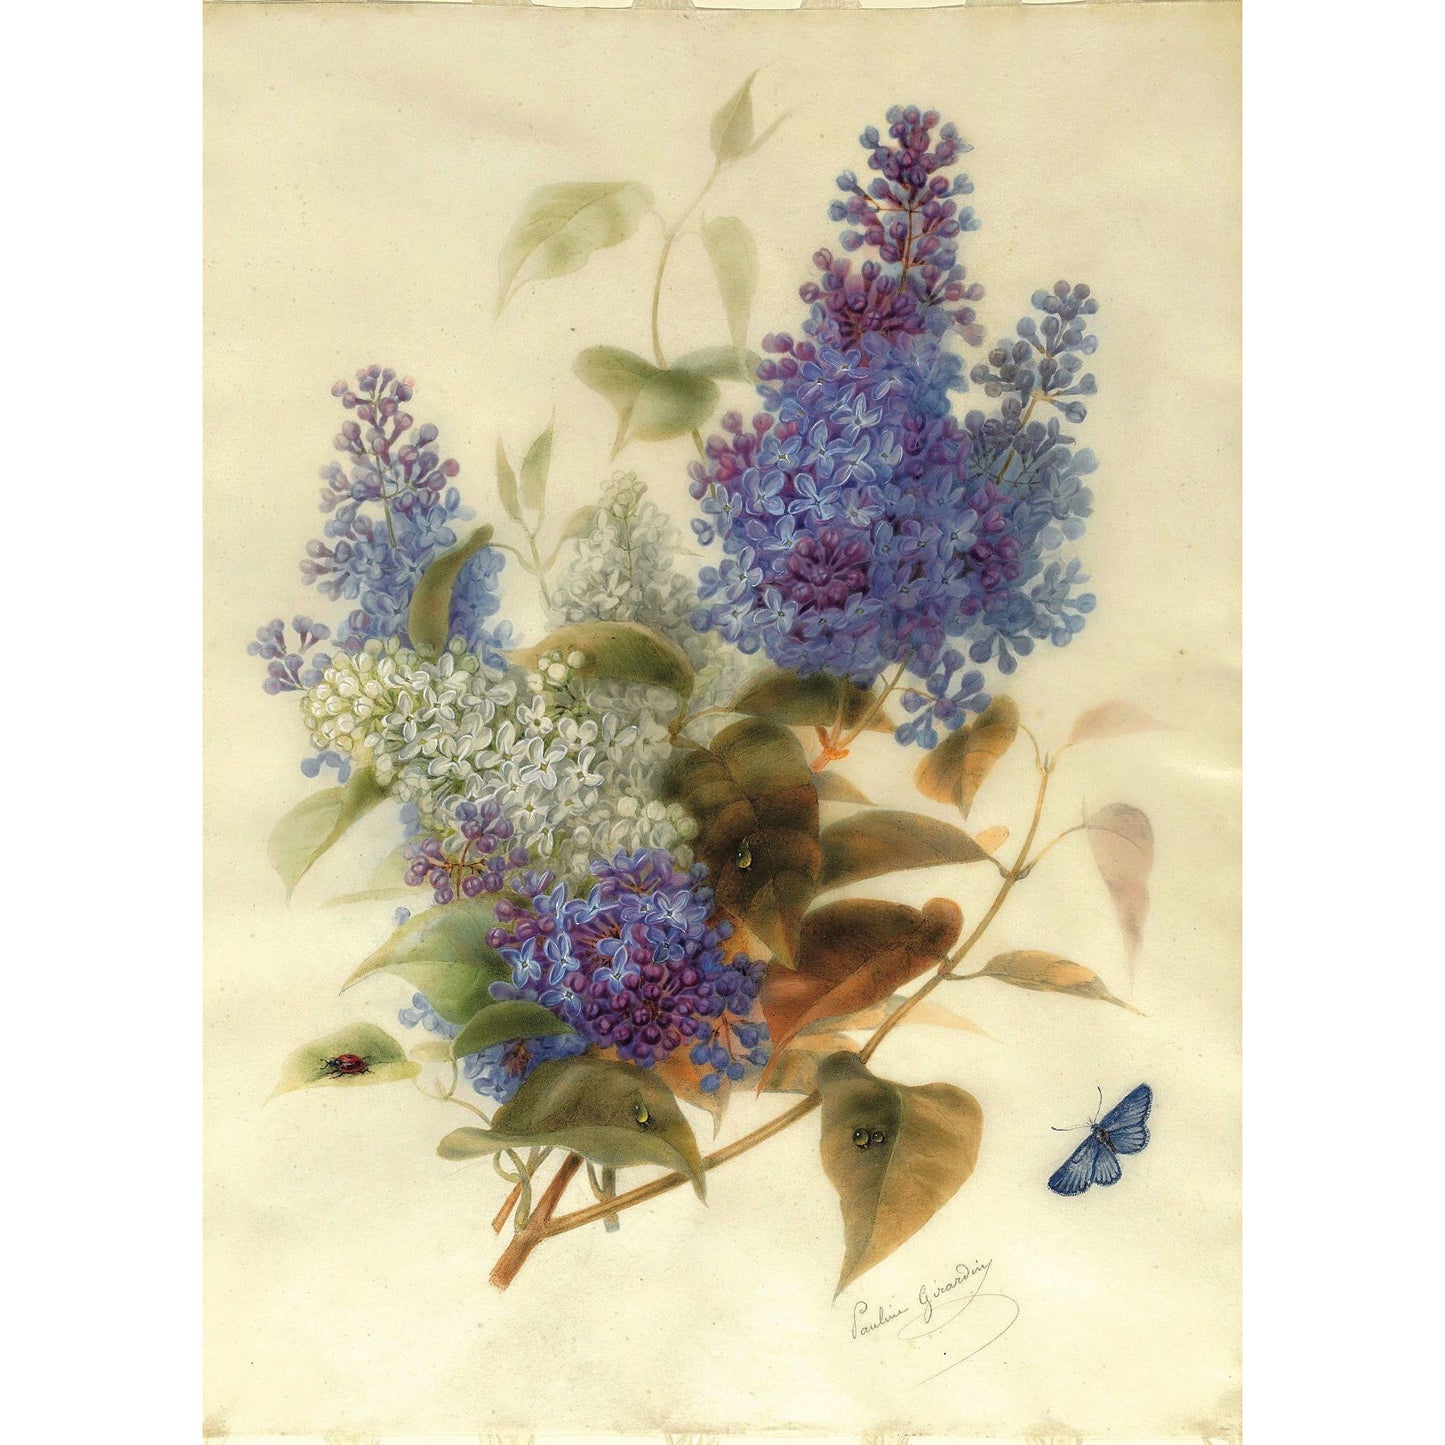 Greeting card - Spray of Lilac by Pauline Girardin. Study of lilac flowers in different shades of purple, blue and white. From the Broughton collection of The Fitzwilliam Museum, brought to you by CuratingCambridge.com